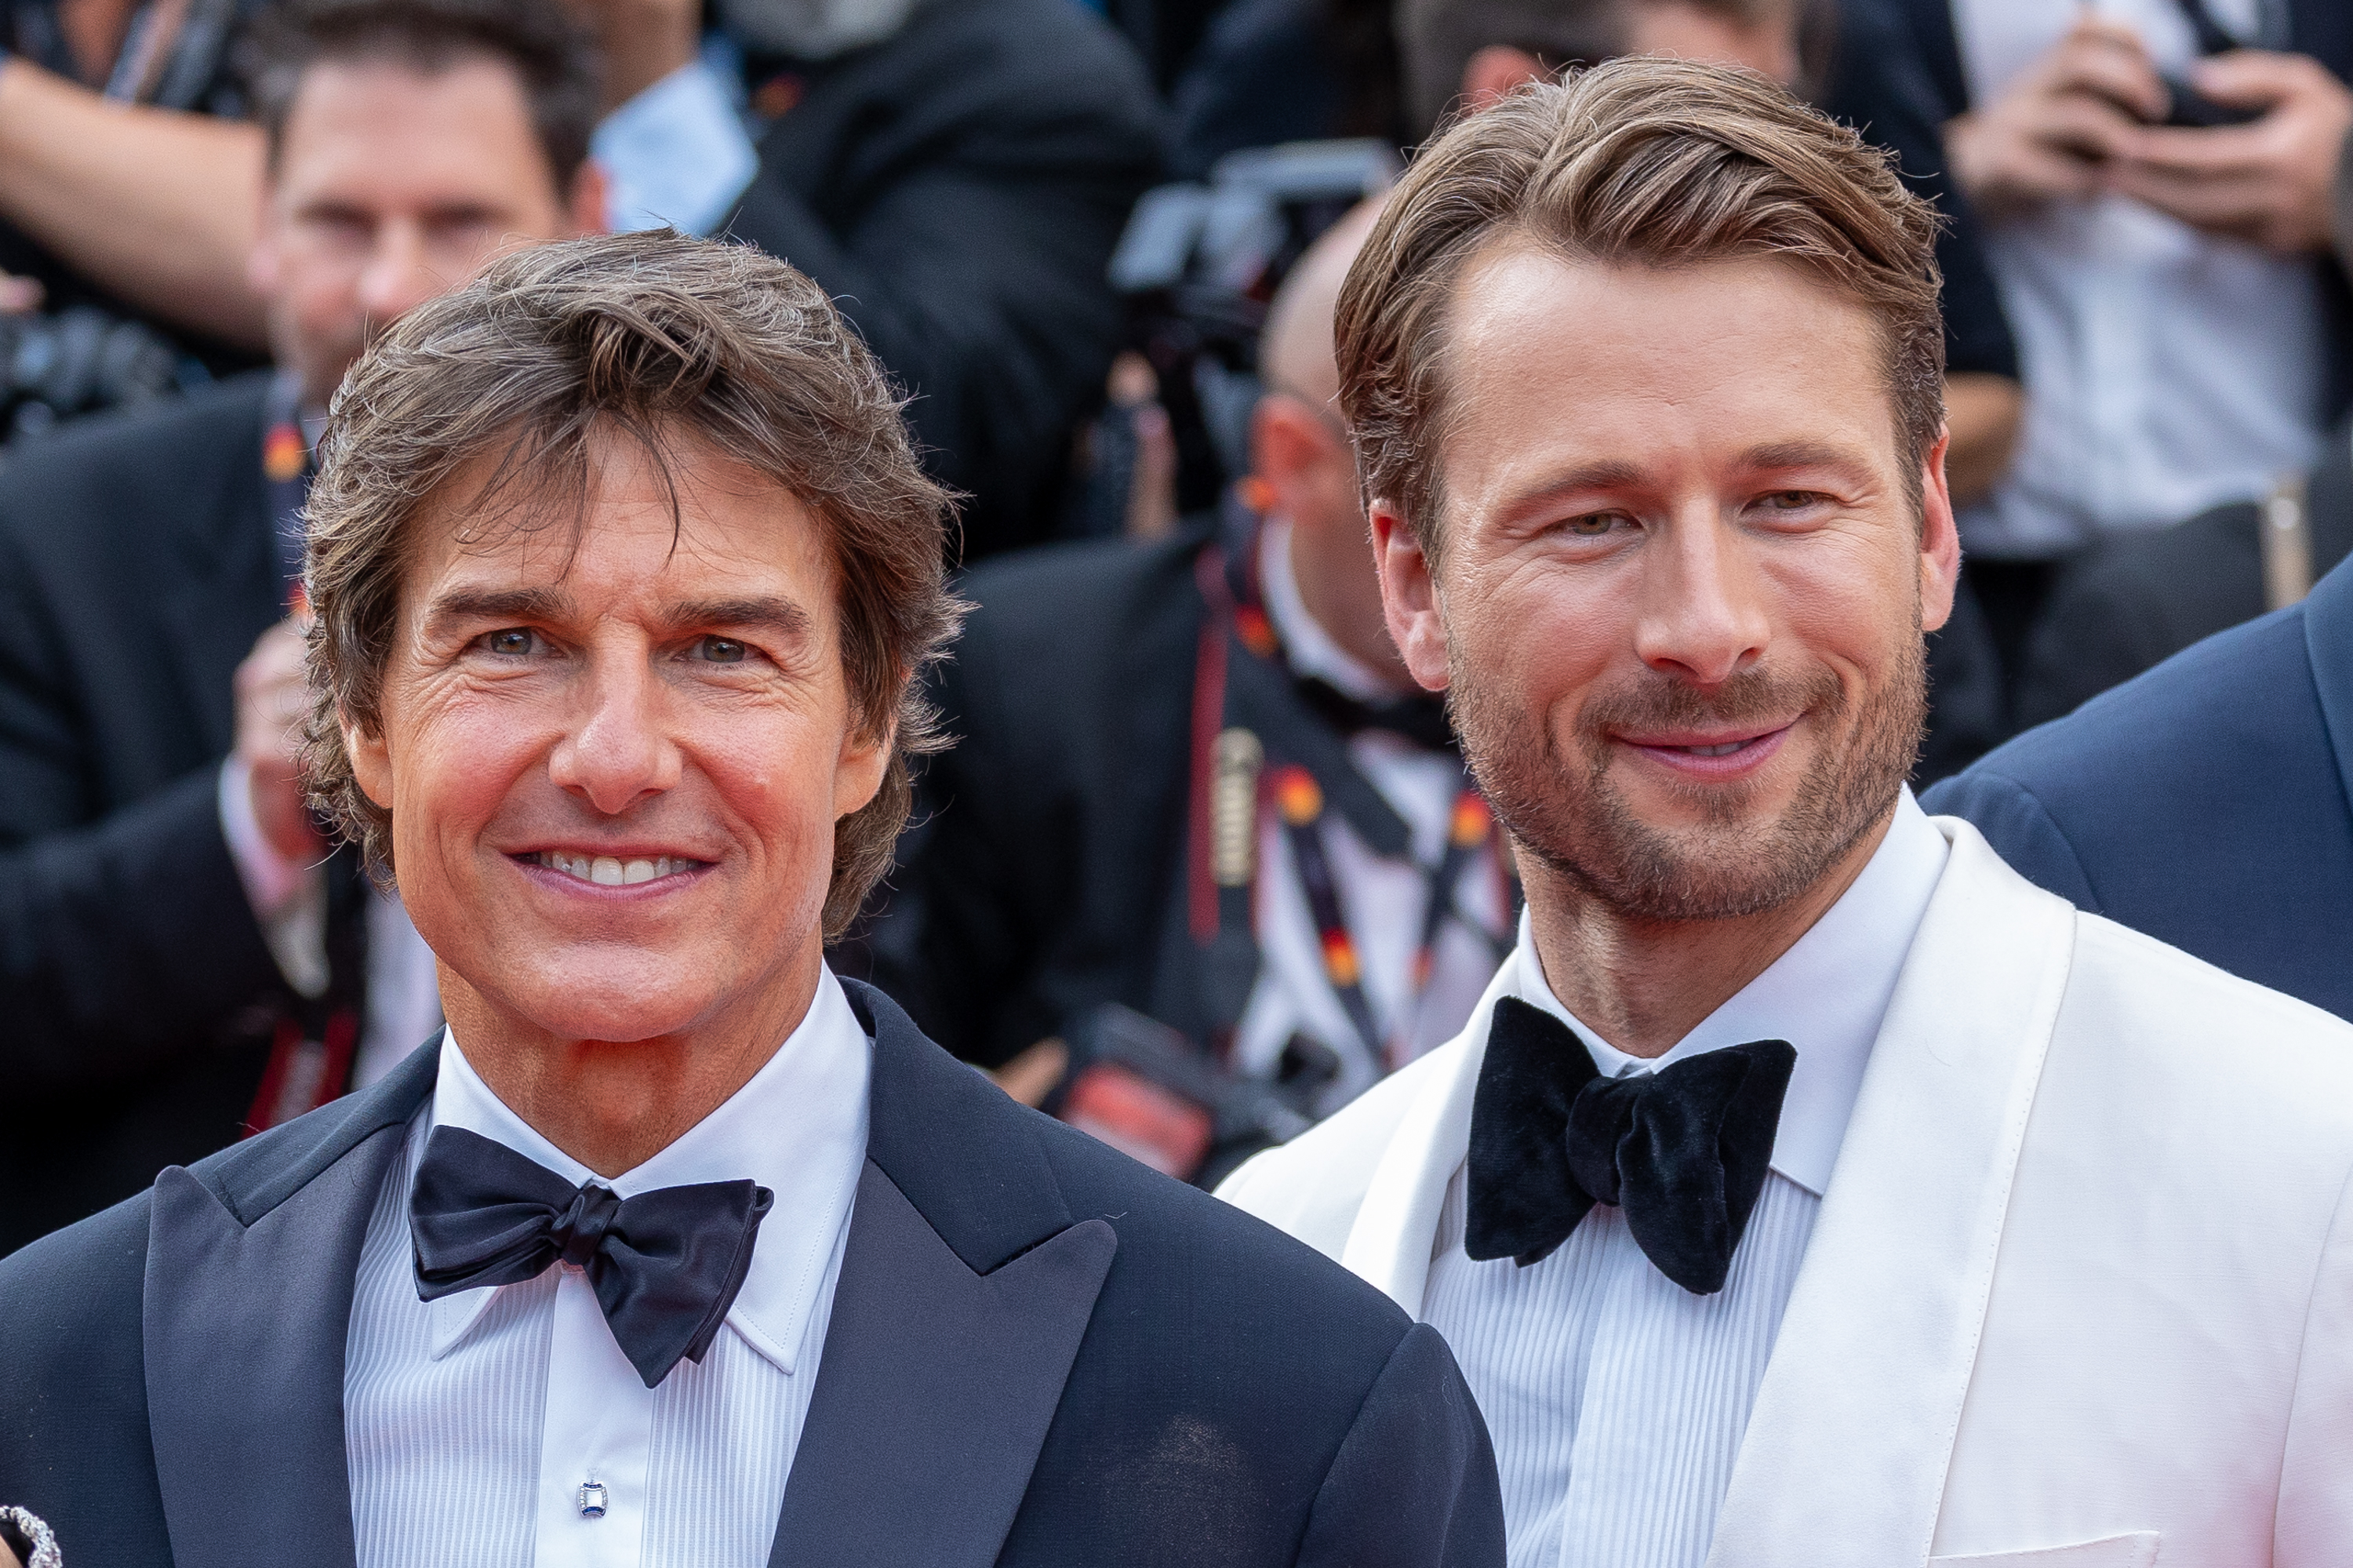 Tom Cruise and Glen Powell smiling on the red carpet, both wearing tuxedos with bow ties